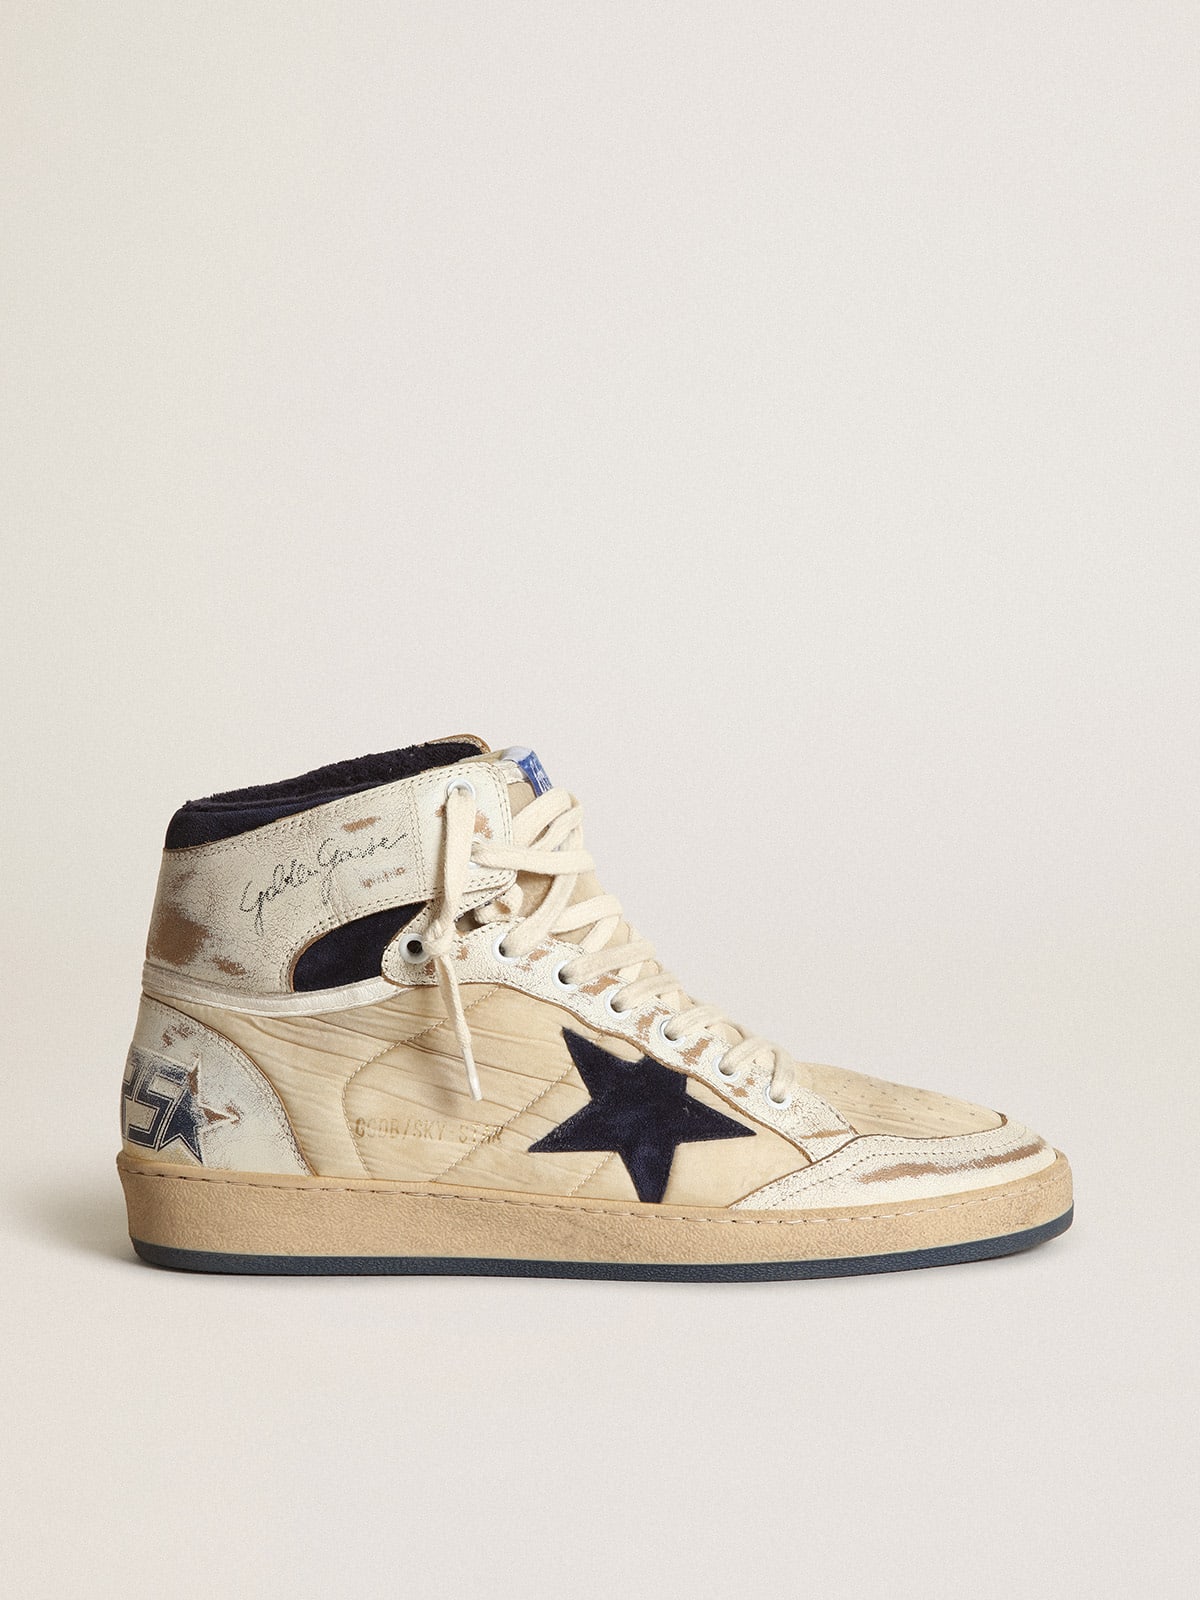 Men's Sky-Star sneakers in cream-colored nylon and white leather with dark blue suede star